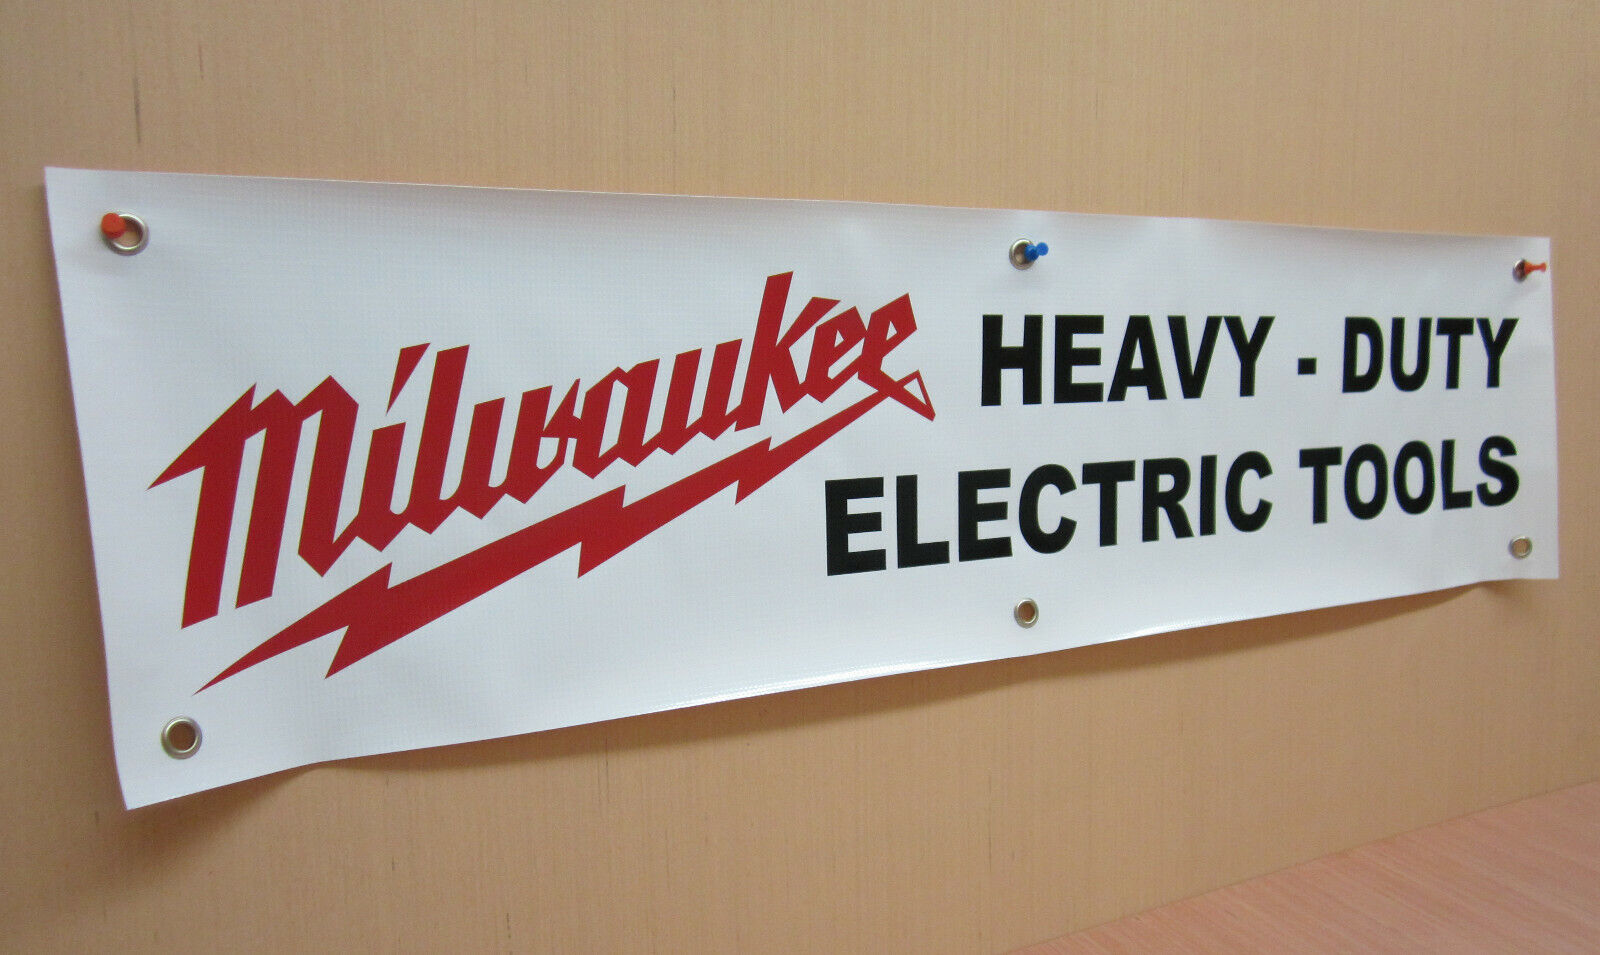 MILWAUKEE HEAVY DUTY ELECTRIC TOOLS BANNER ADVERTISING SIGN